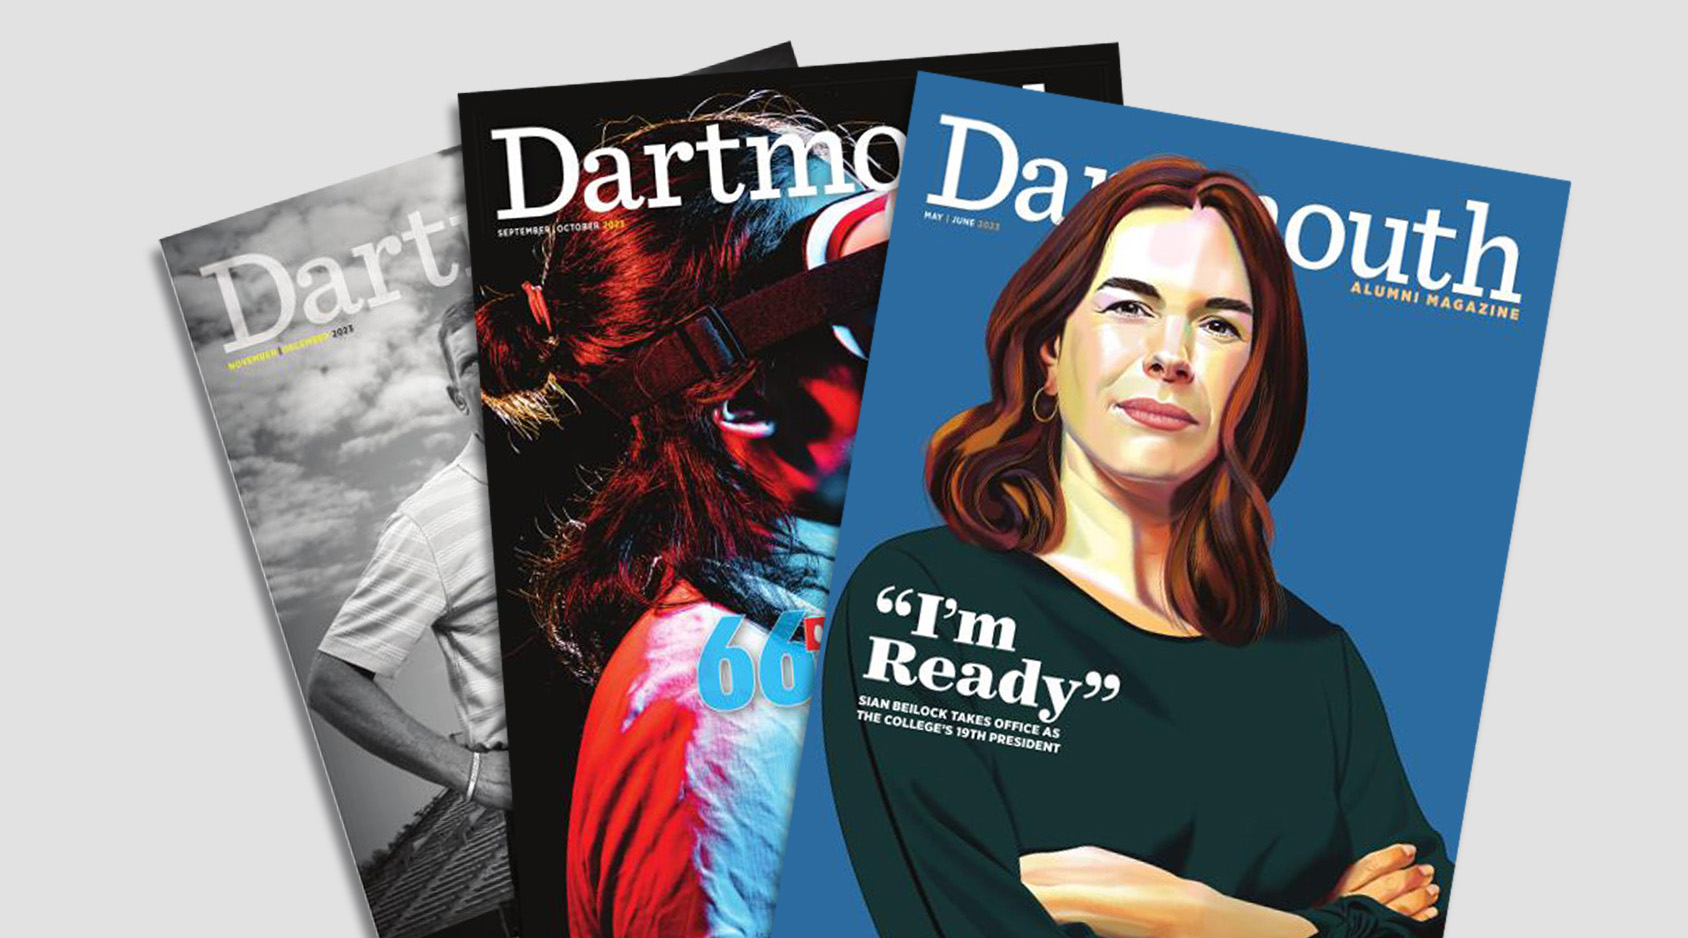 Three covers of Dartmouth Alumni Magazine scattered on a flat surface